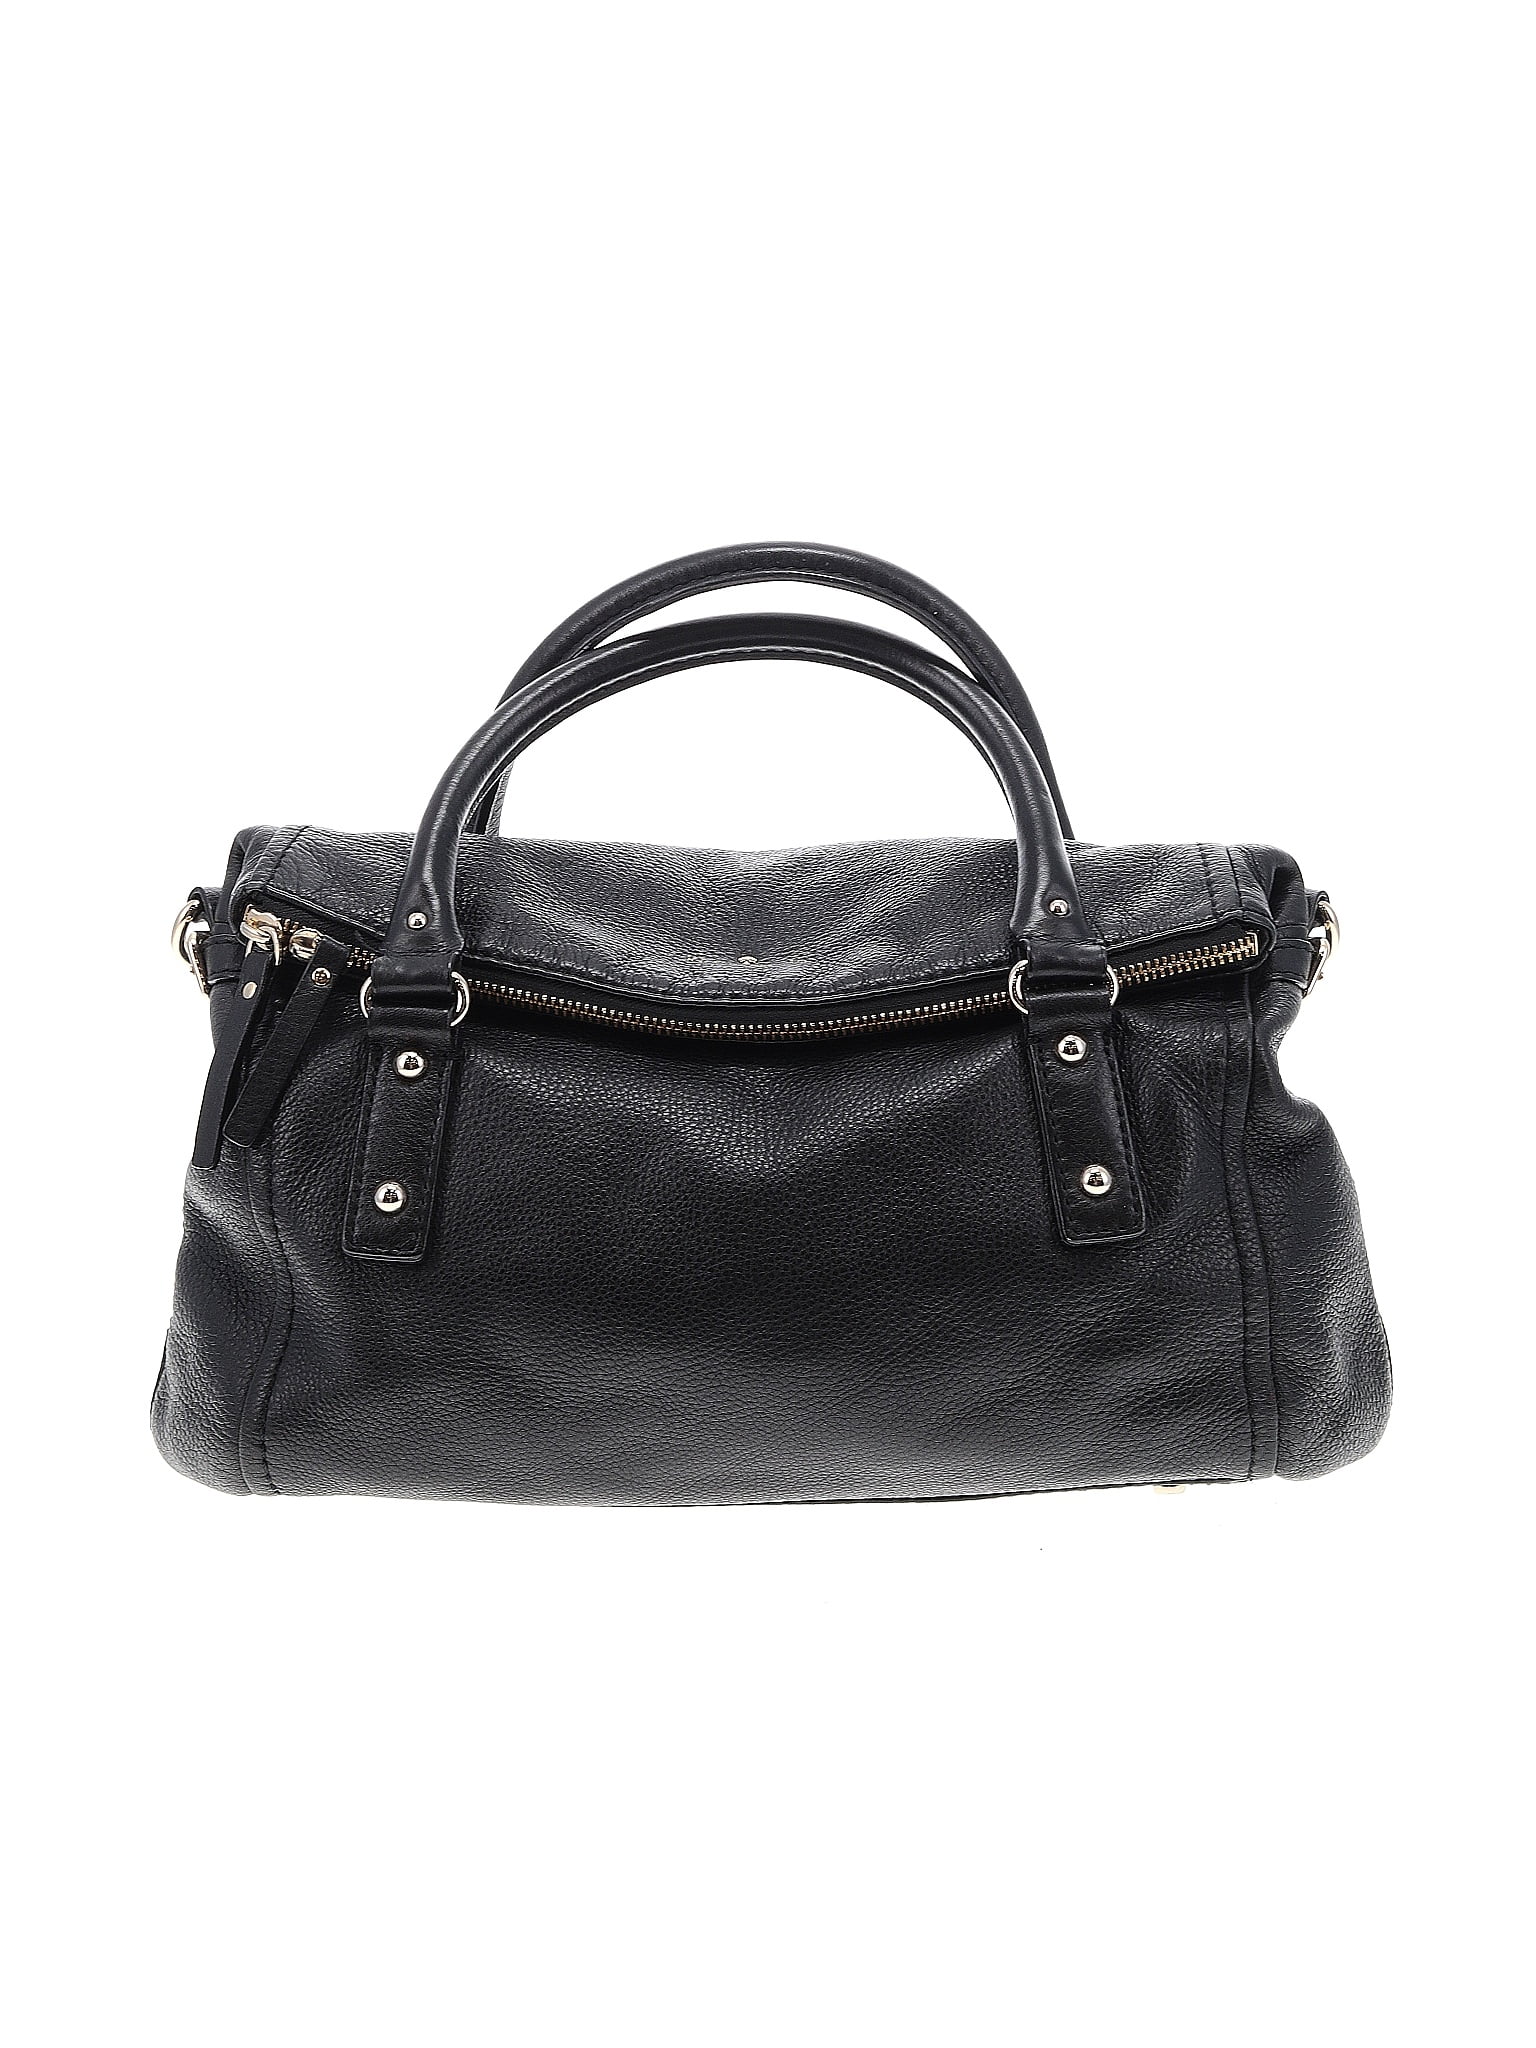 Kate Spade New York Solid Black Leather Satchel One Size - 75% off ...